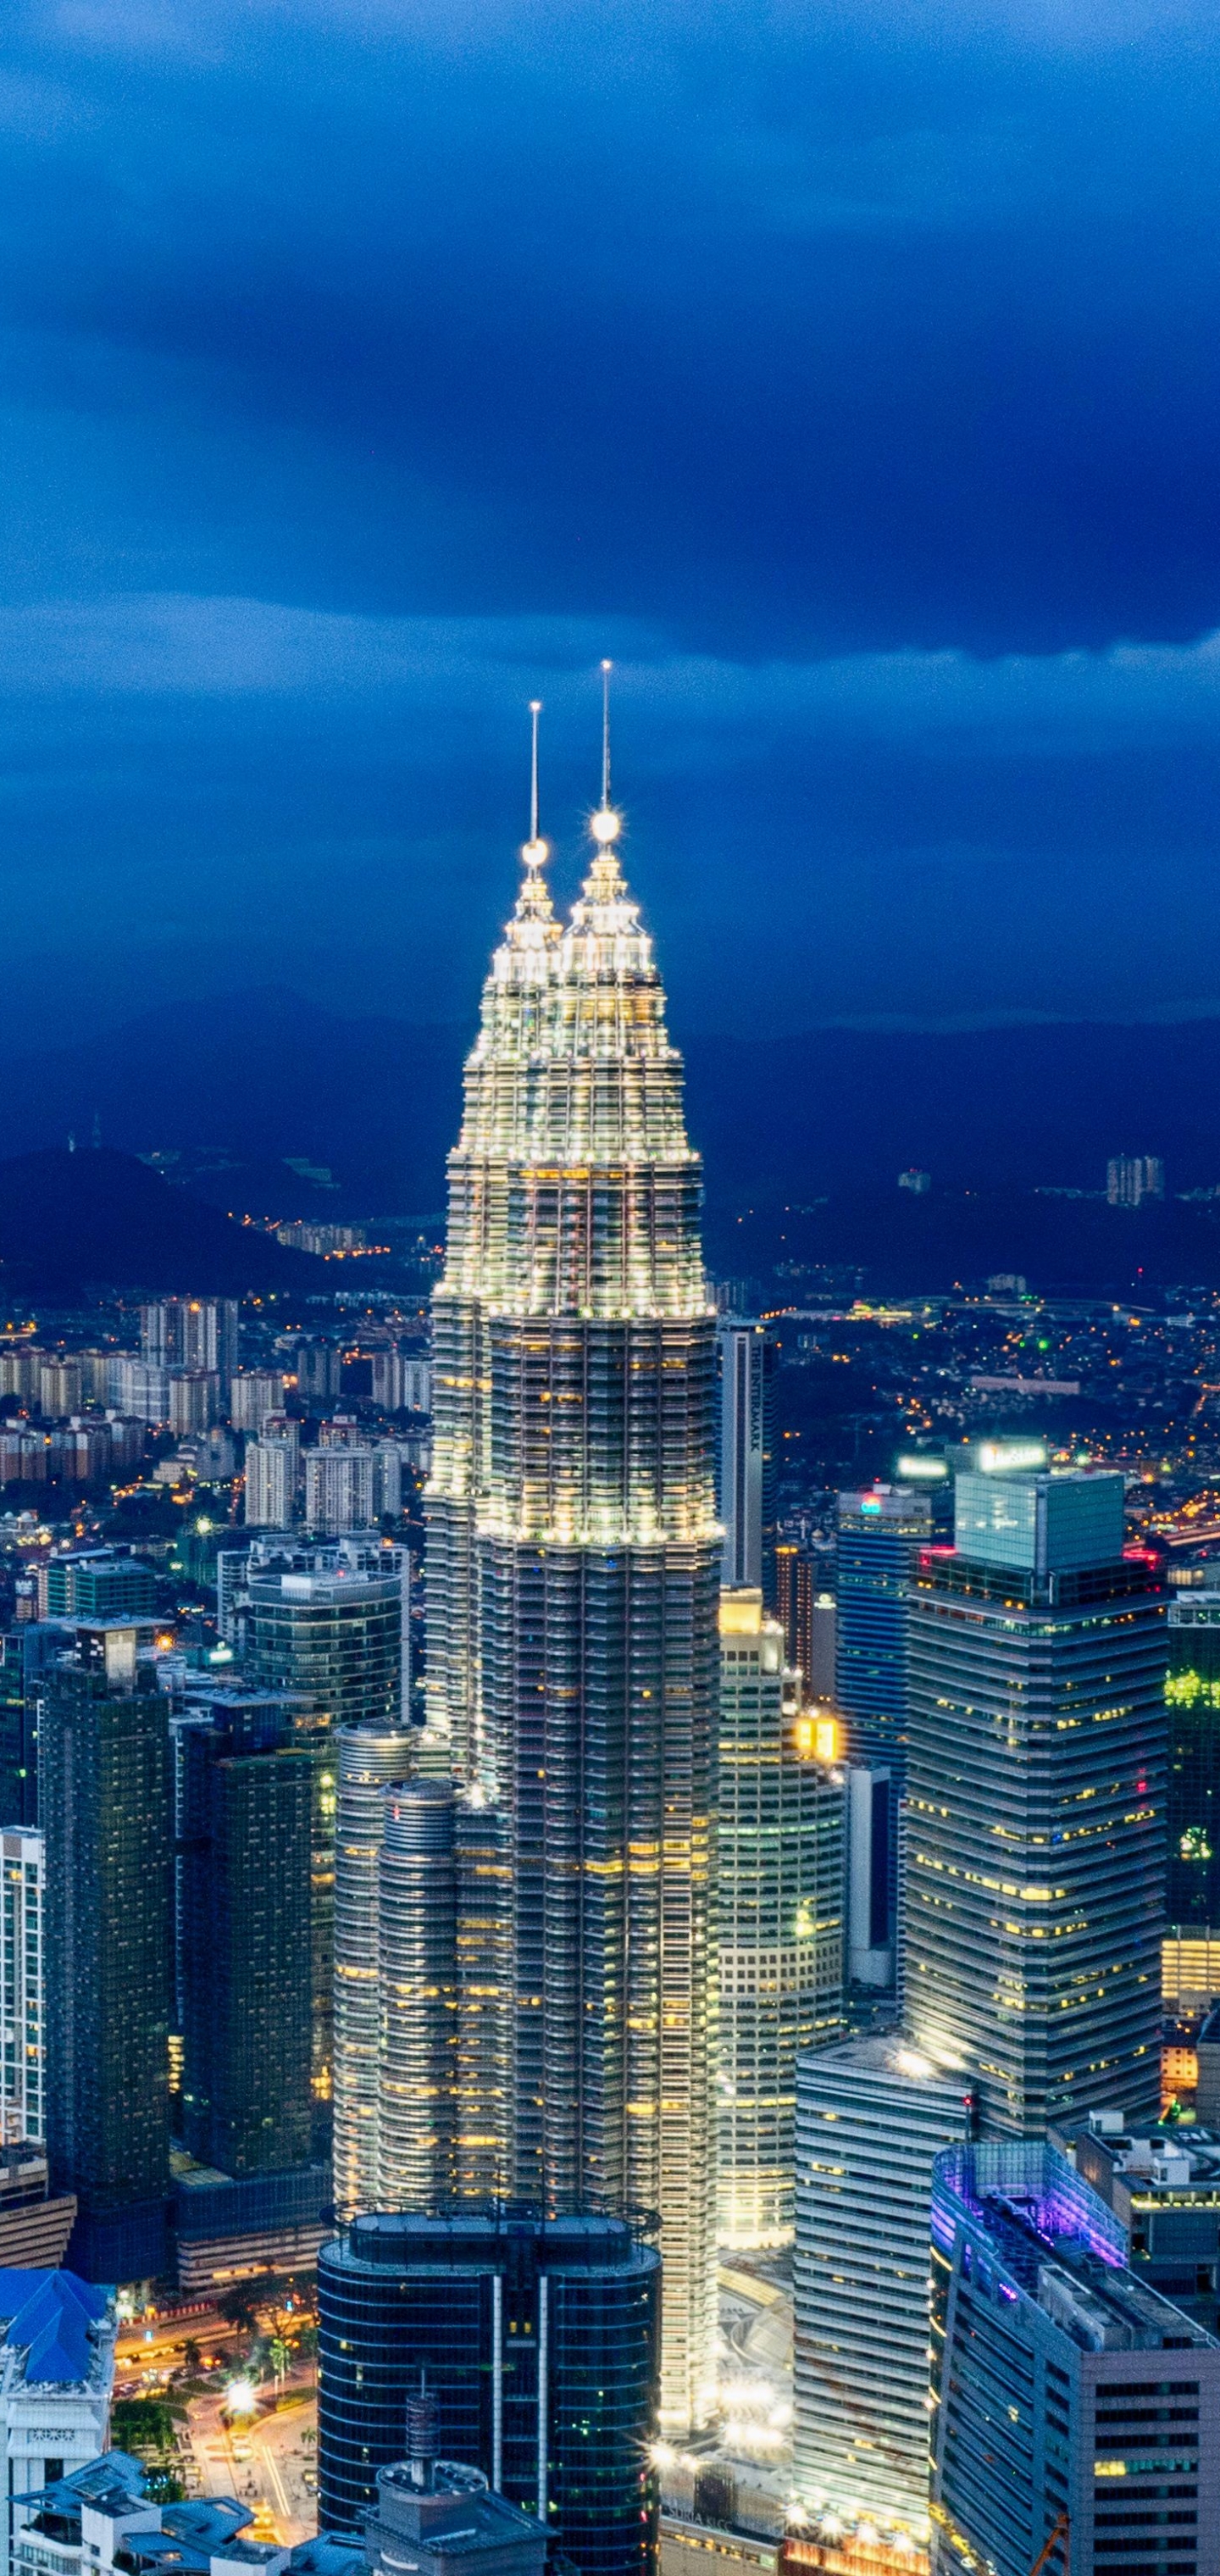 Download mobile wallpaper Cities, Night, Architecture, City, Skyscraper, Building, Light, Cityscape, Kuala Lumpur, Malaysia, Metropolis, Man Made, Petronas Towers for free.